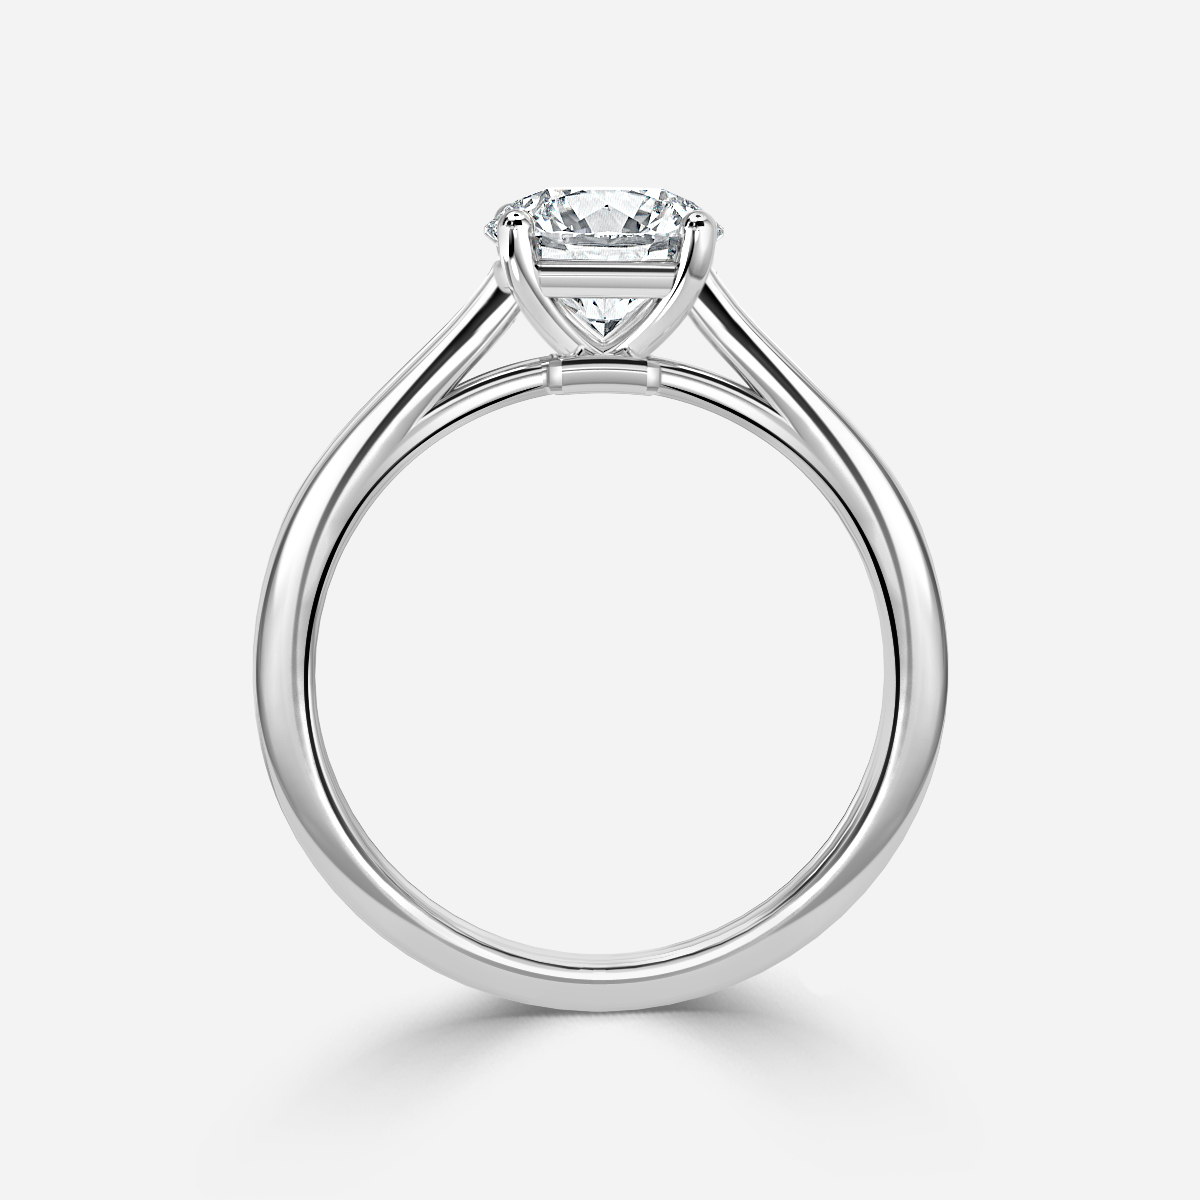 Sabene White Gold Solitaire Engagement Ring